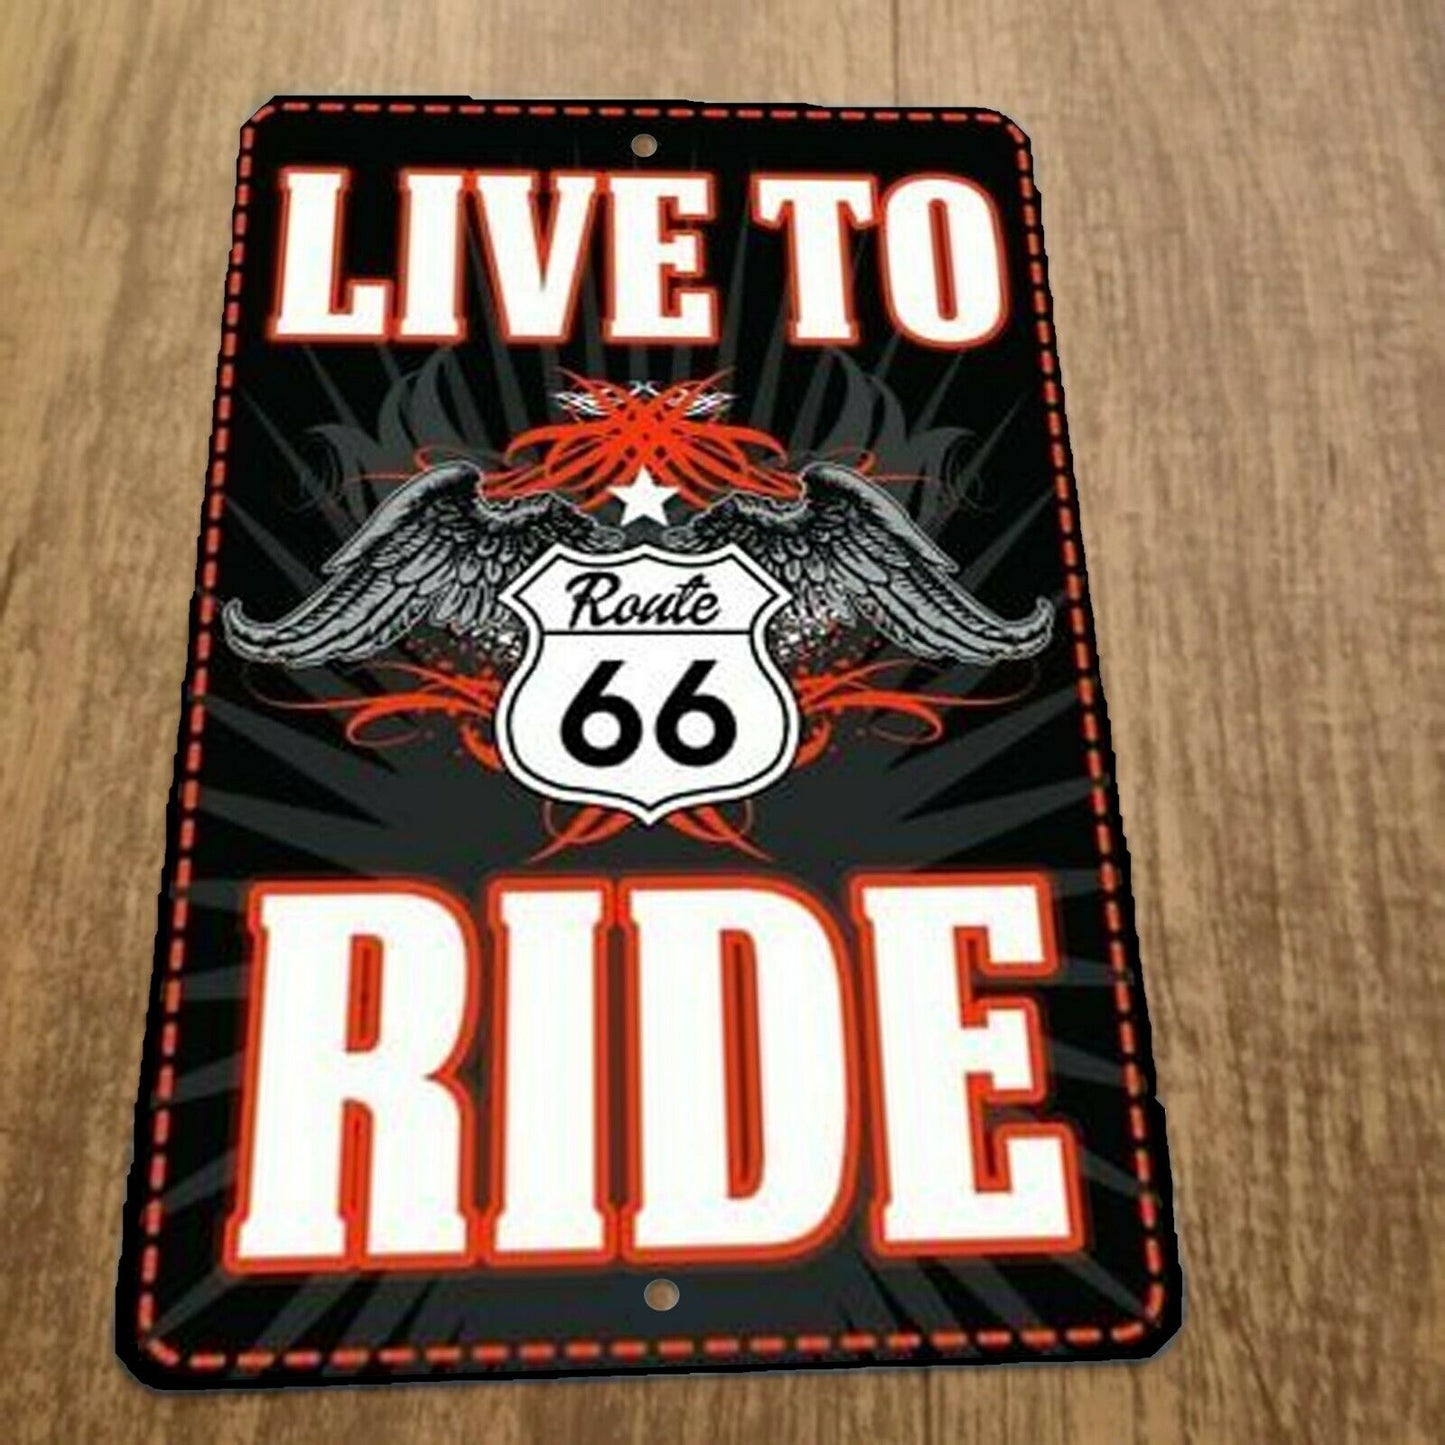 Route 66 Live to Ride Bikers 8x12 Metal Wall Sign Motorcycle Garage Poster